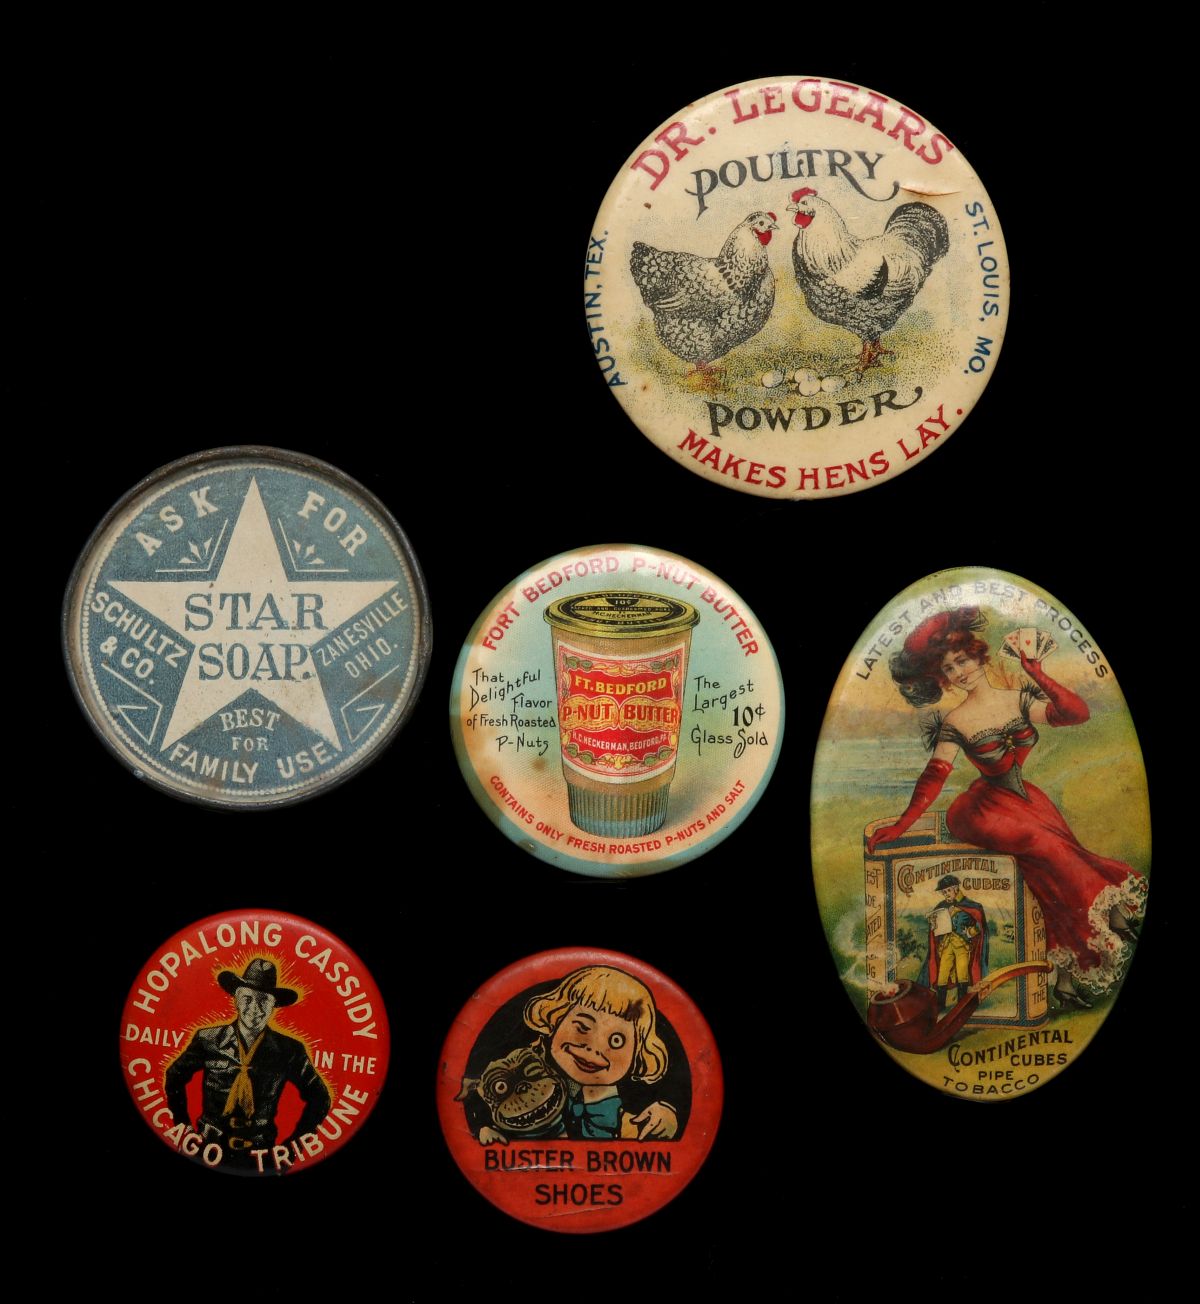 FT BEDFORD P-NUT BUTTER & OTHER 1900s ADVERTISING